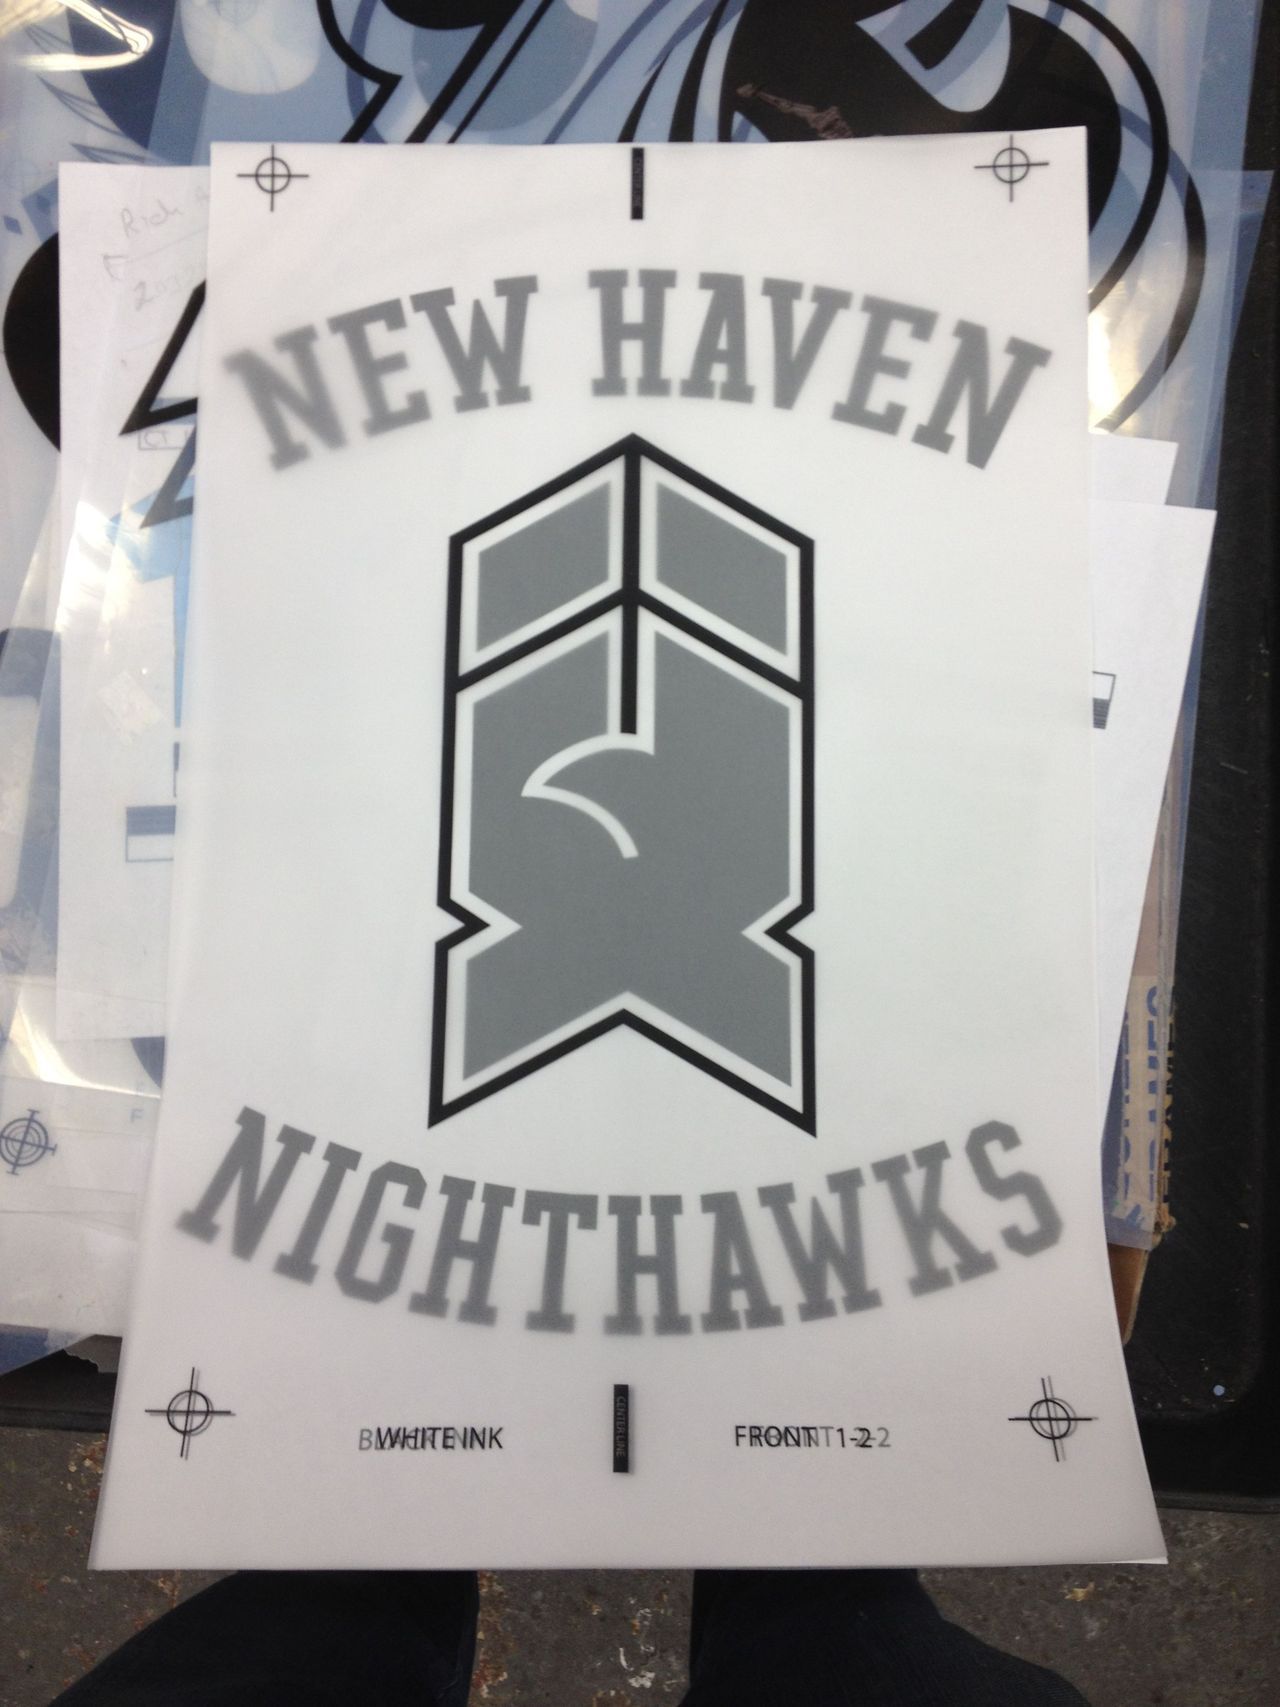 Transparencies for the new Nighthawks shirts.